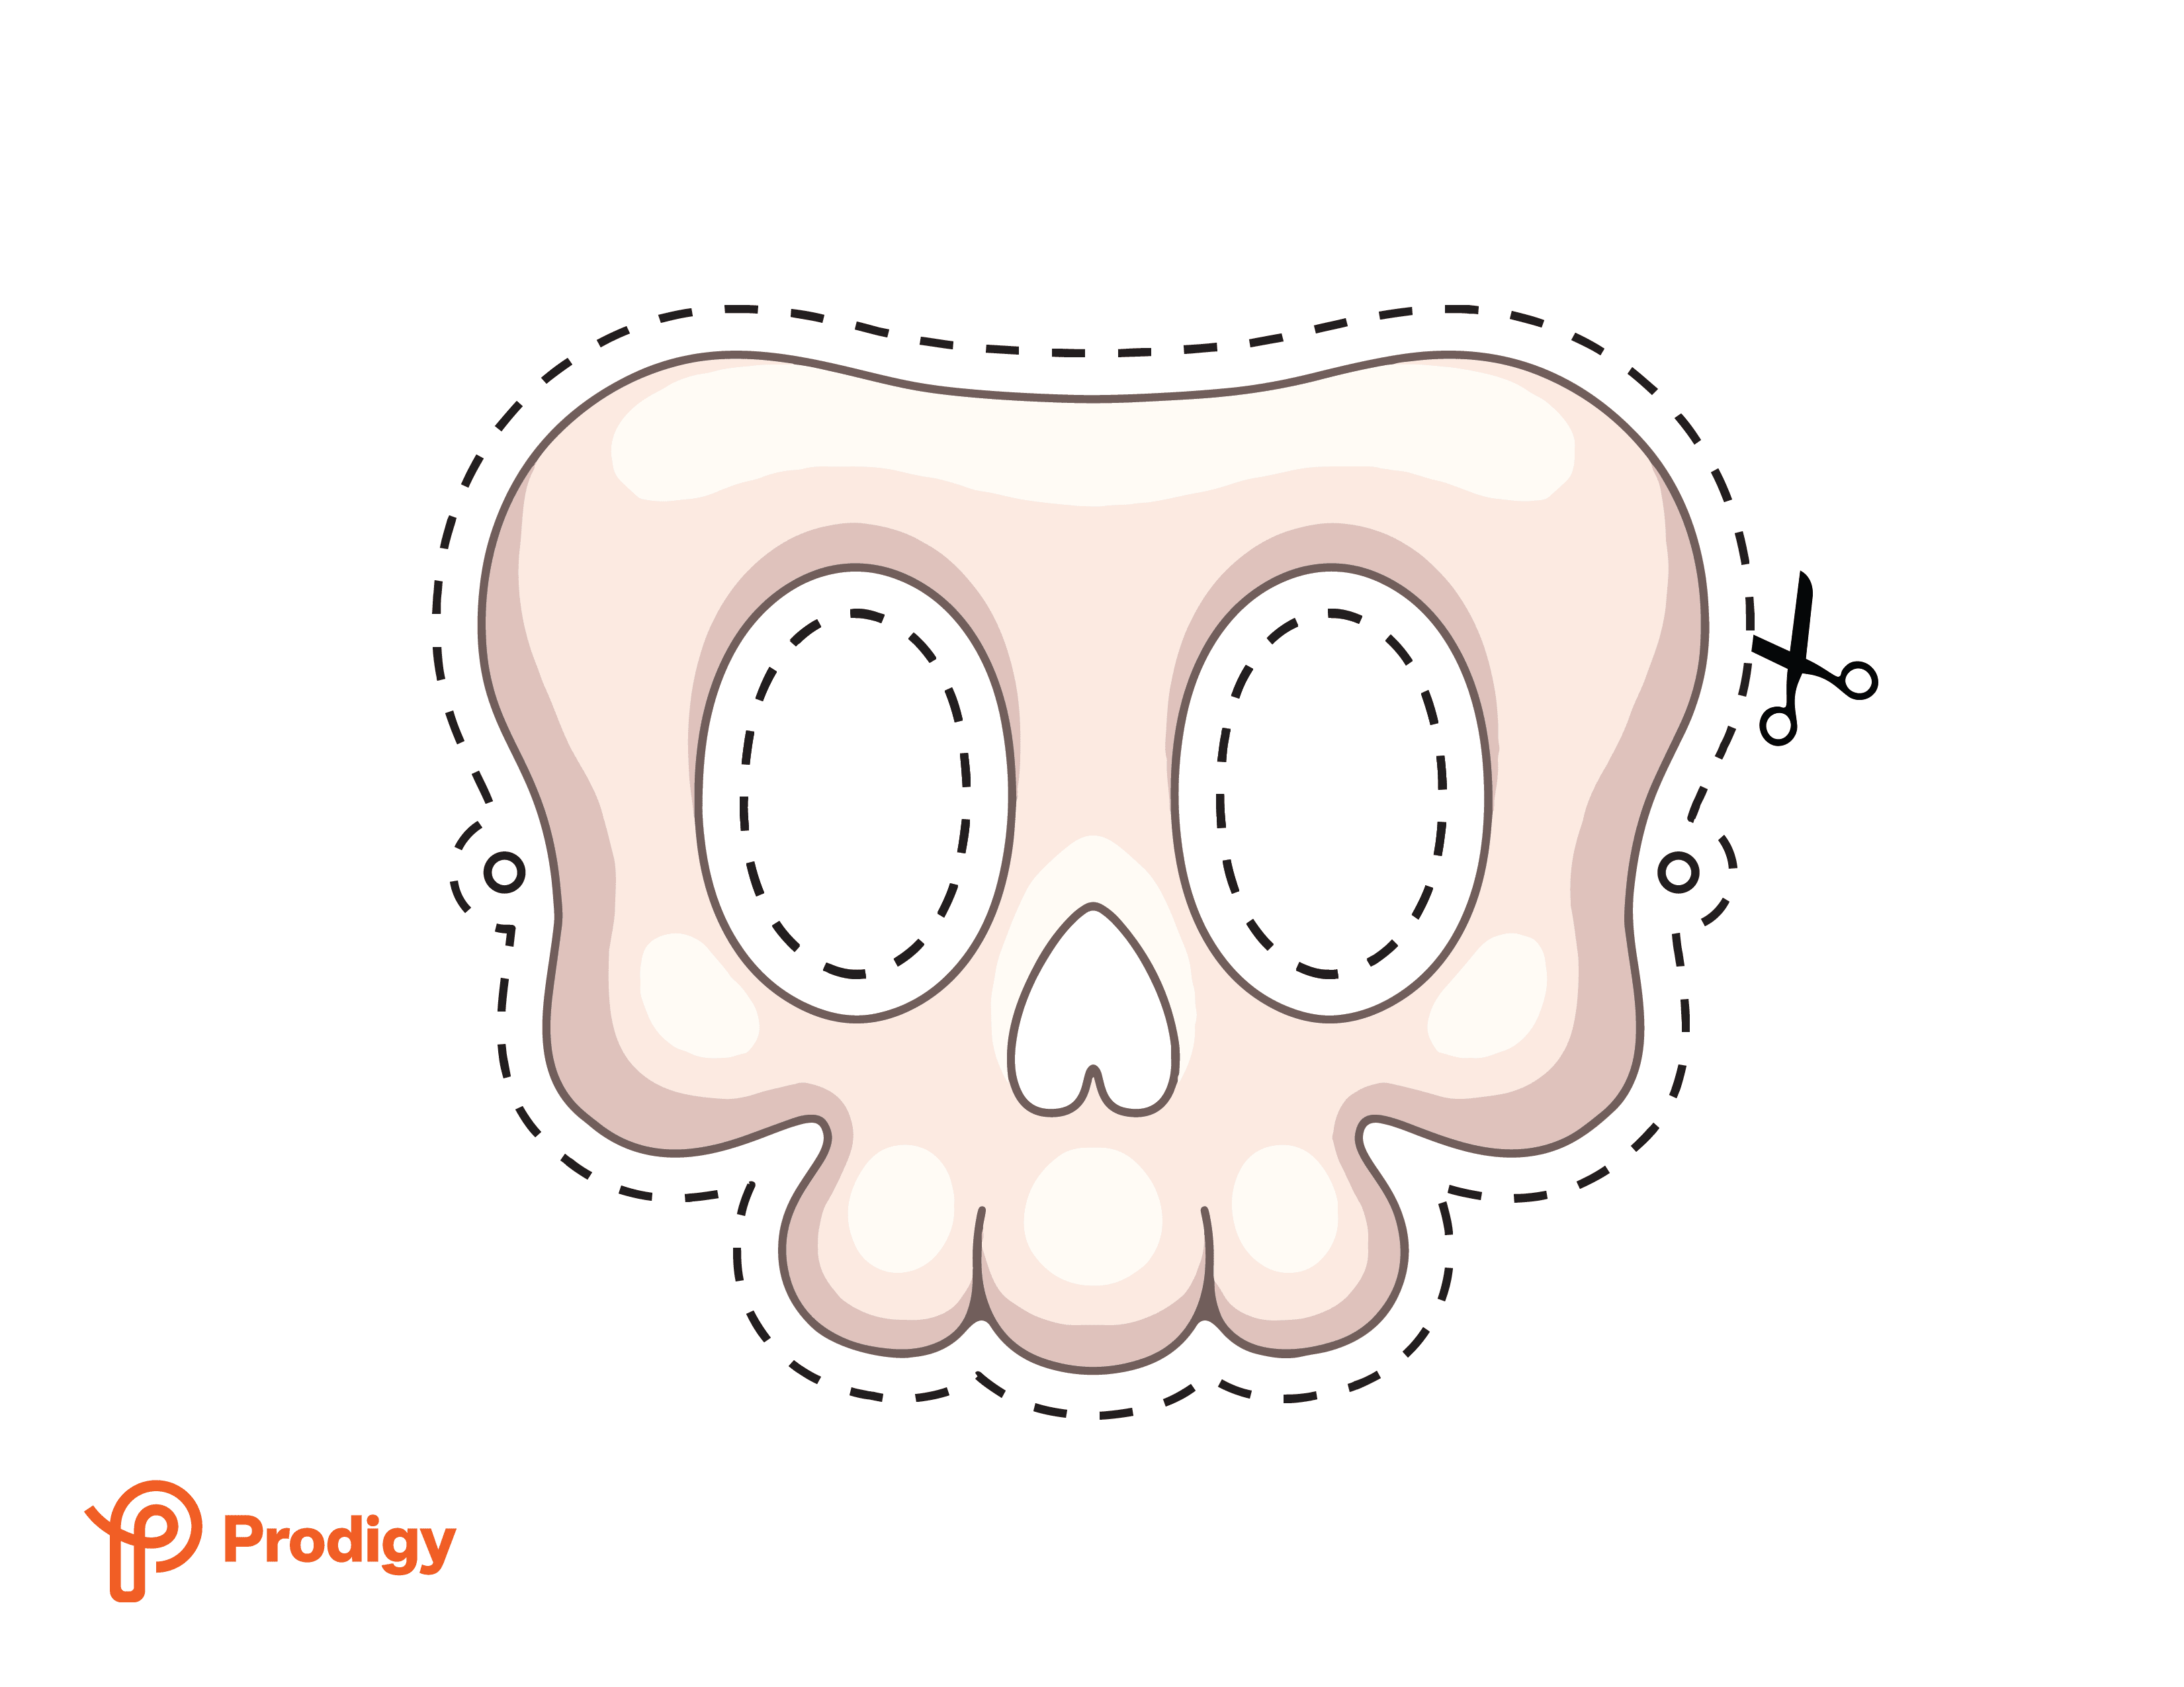 Printable Prodigy skull mask in color